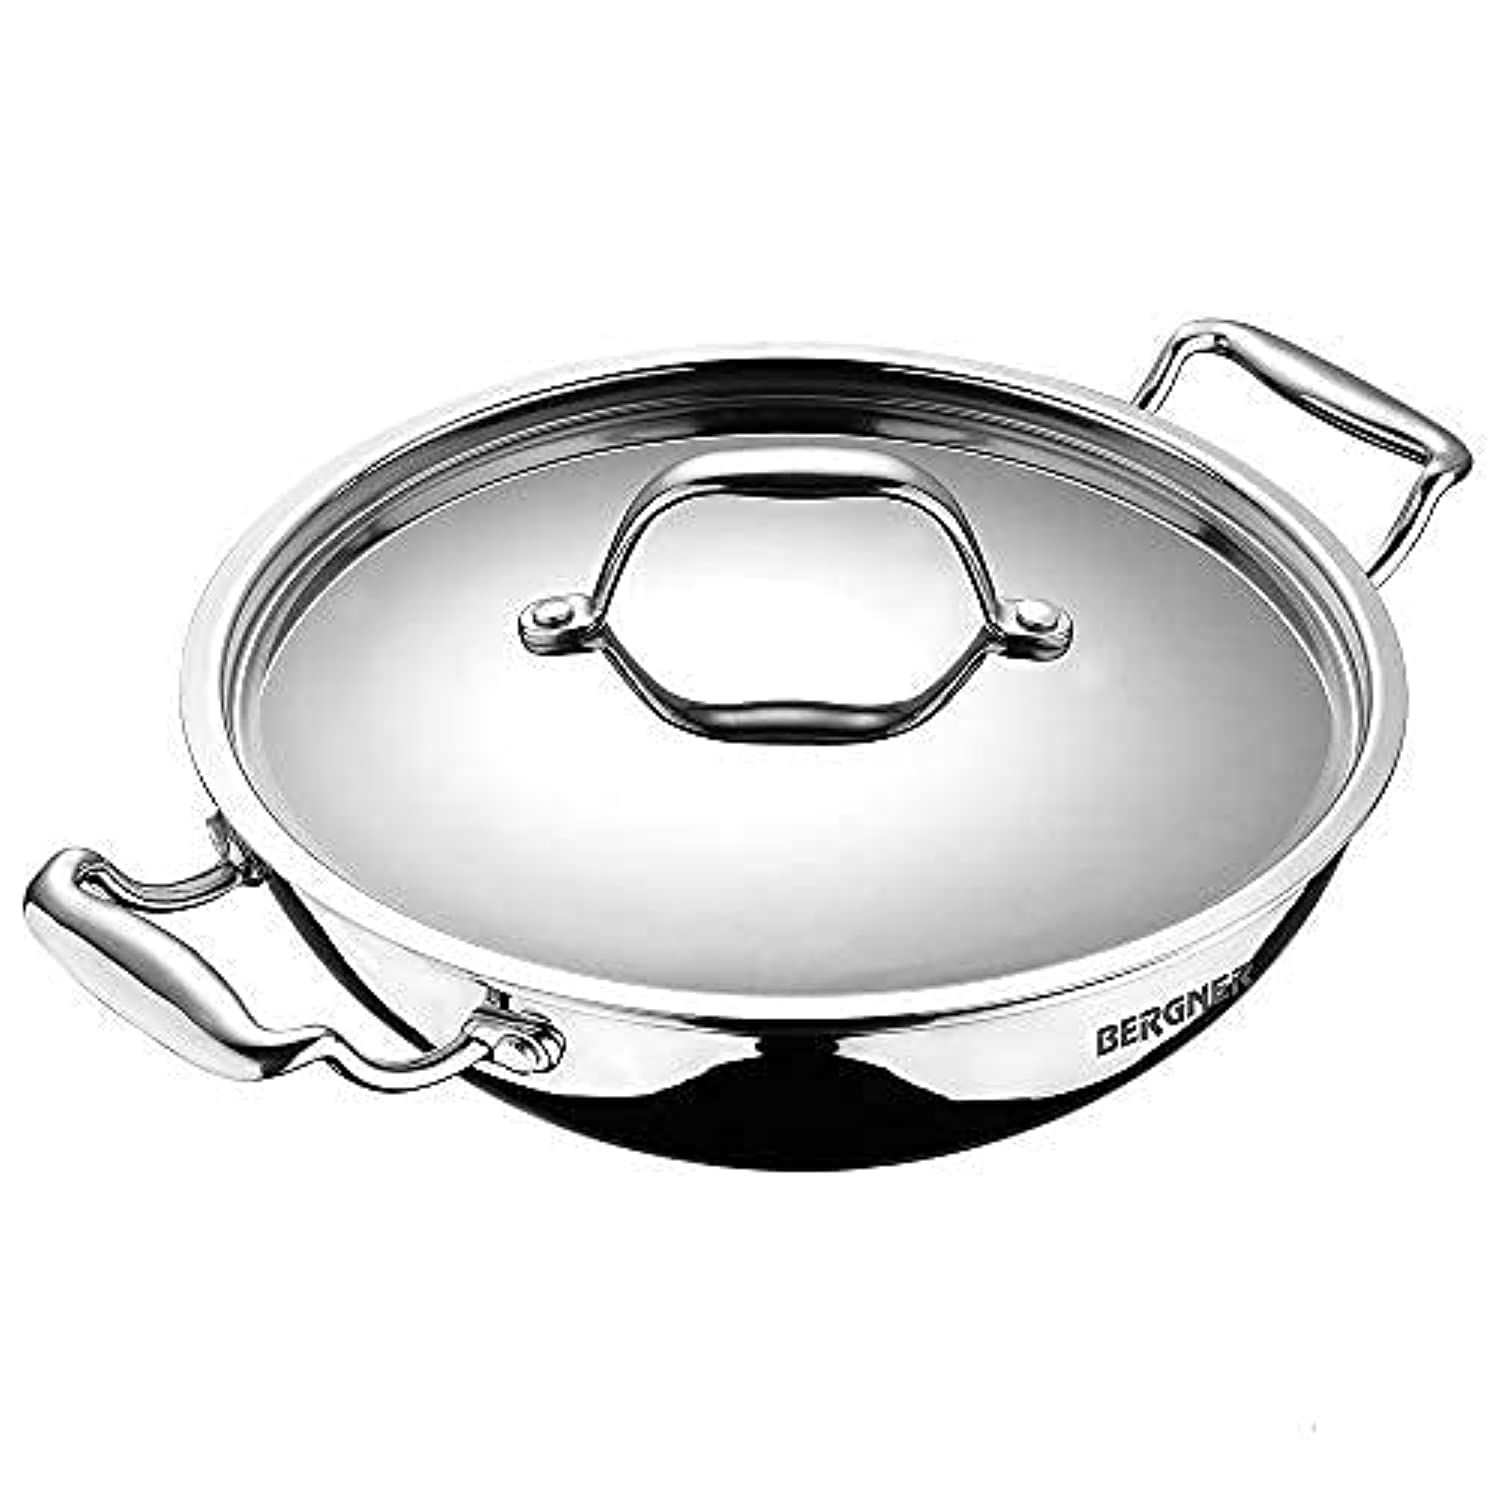 Bergner Argent Triply Deep Kadai, Stainless Steel Lid, For Sauté/Deep Fry/Gravy/Stir Fry/Steam, Heat Resistant Handles, Multi-Layered Mirror Finish, Induction & Gas Ready, 5-Year Warranty